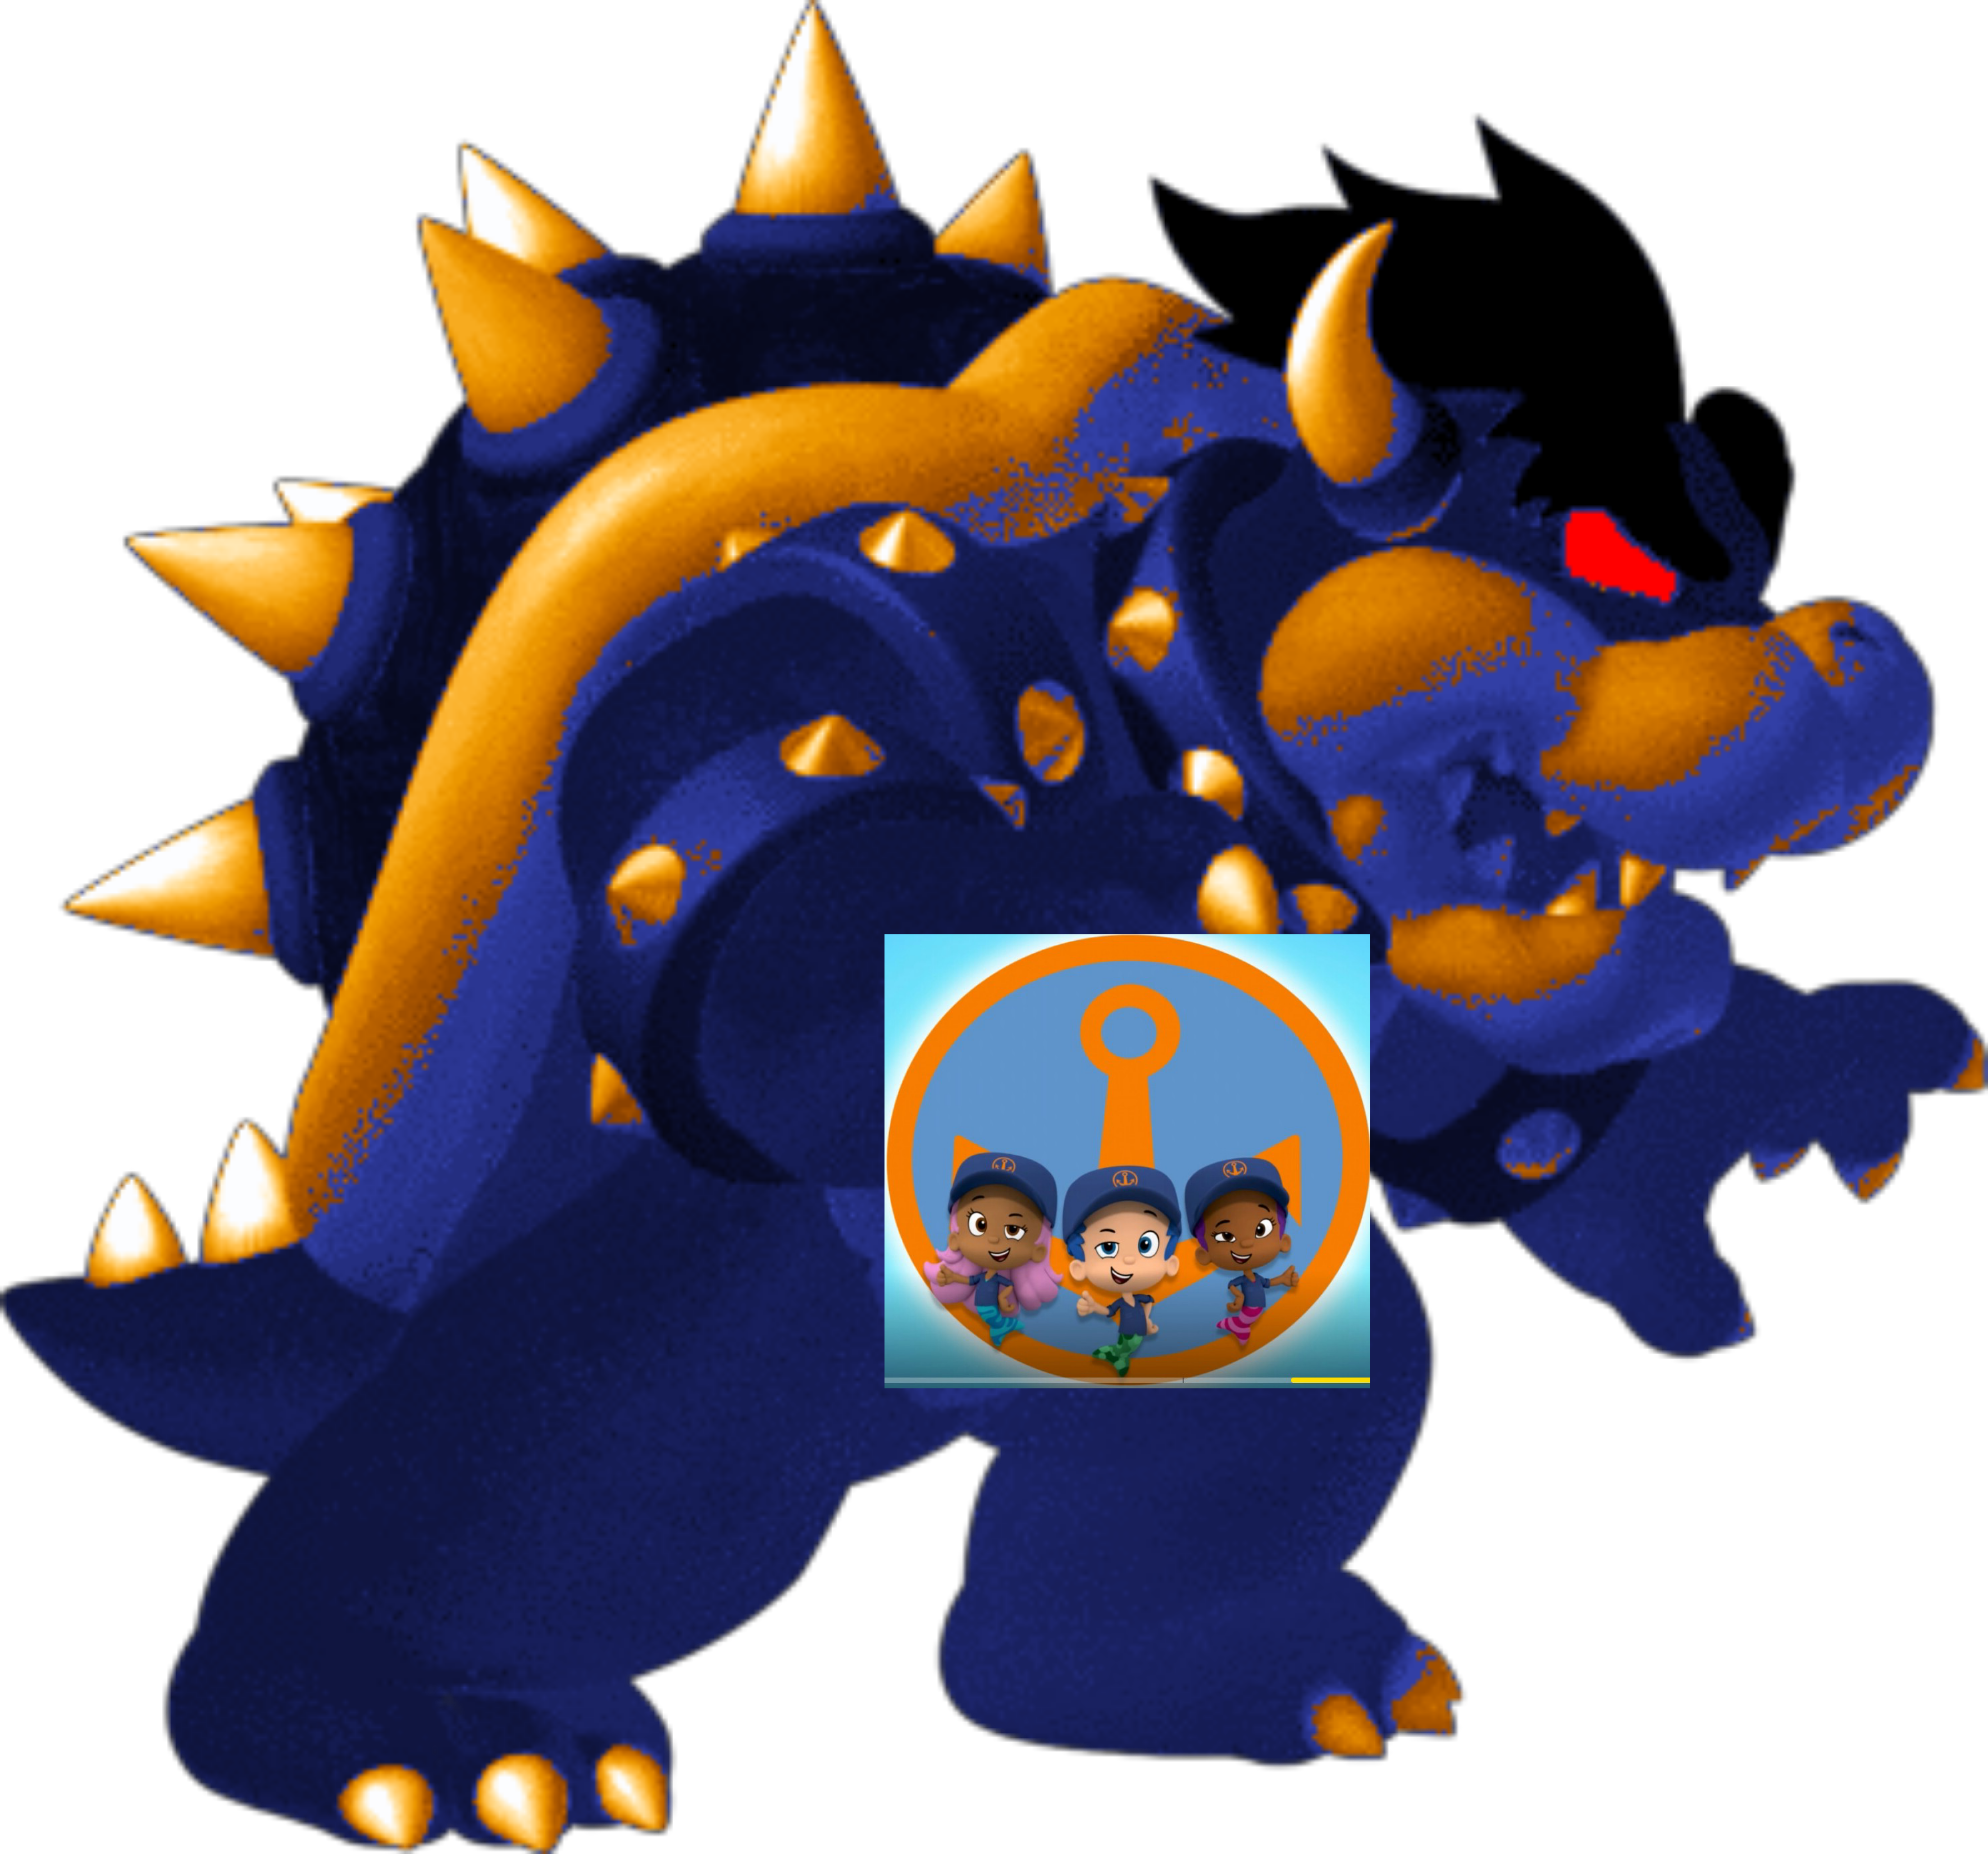 Dry Bowser, Pooh's Adventures Wiki